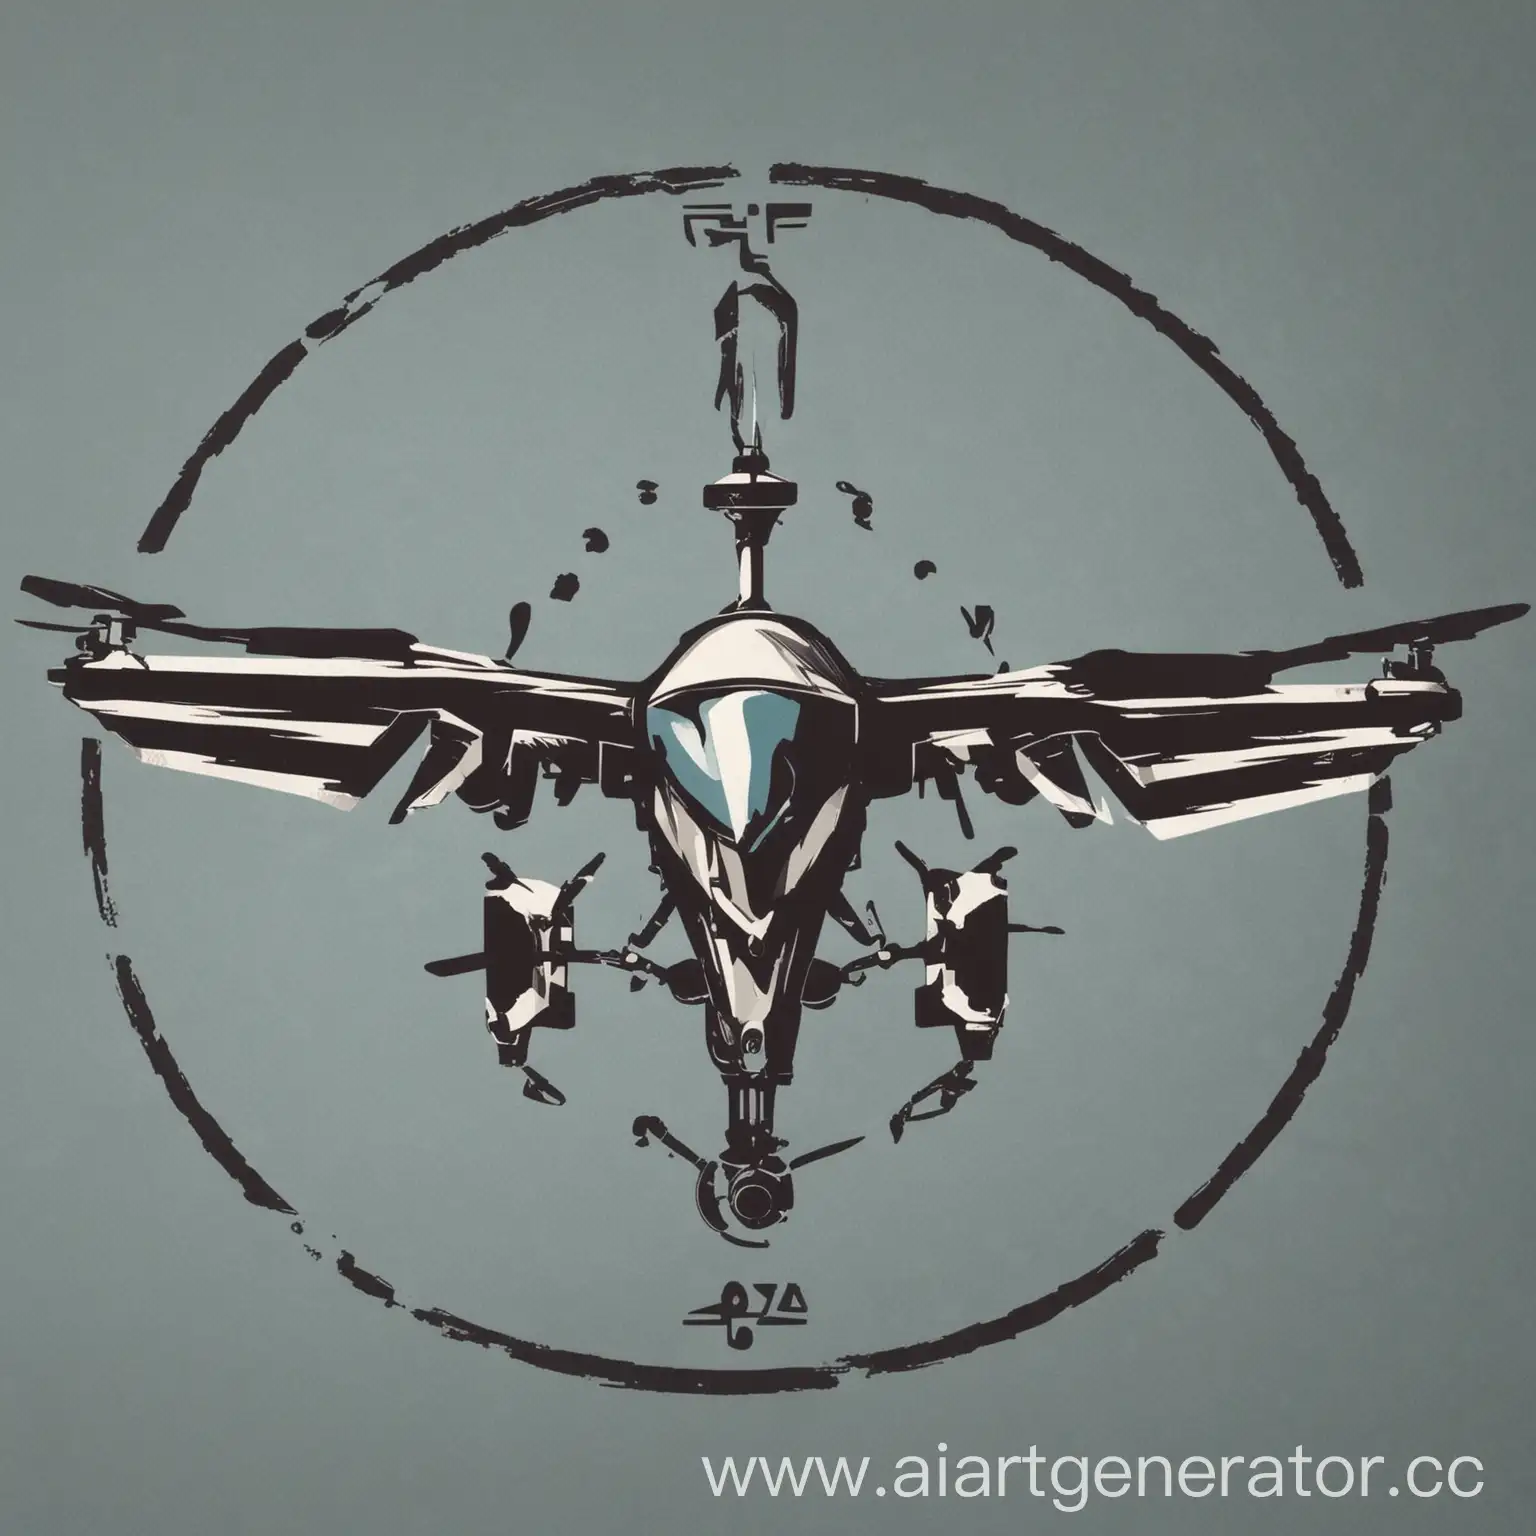 Association-of-Unmanned-Aerial-Systems-Engineer-Russia-Logo